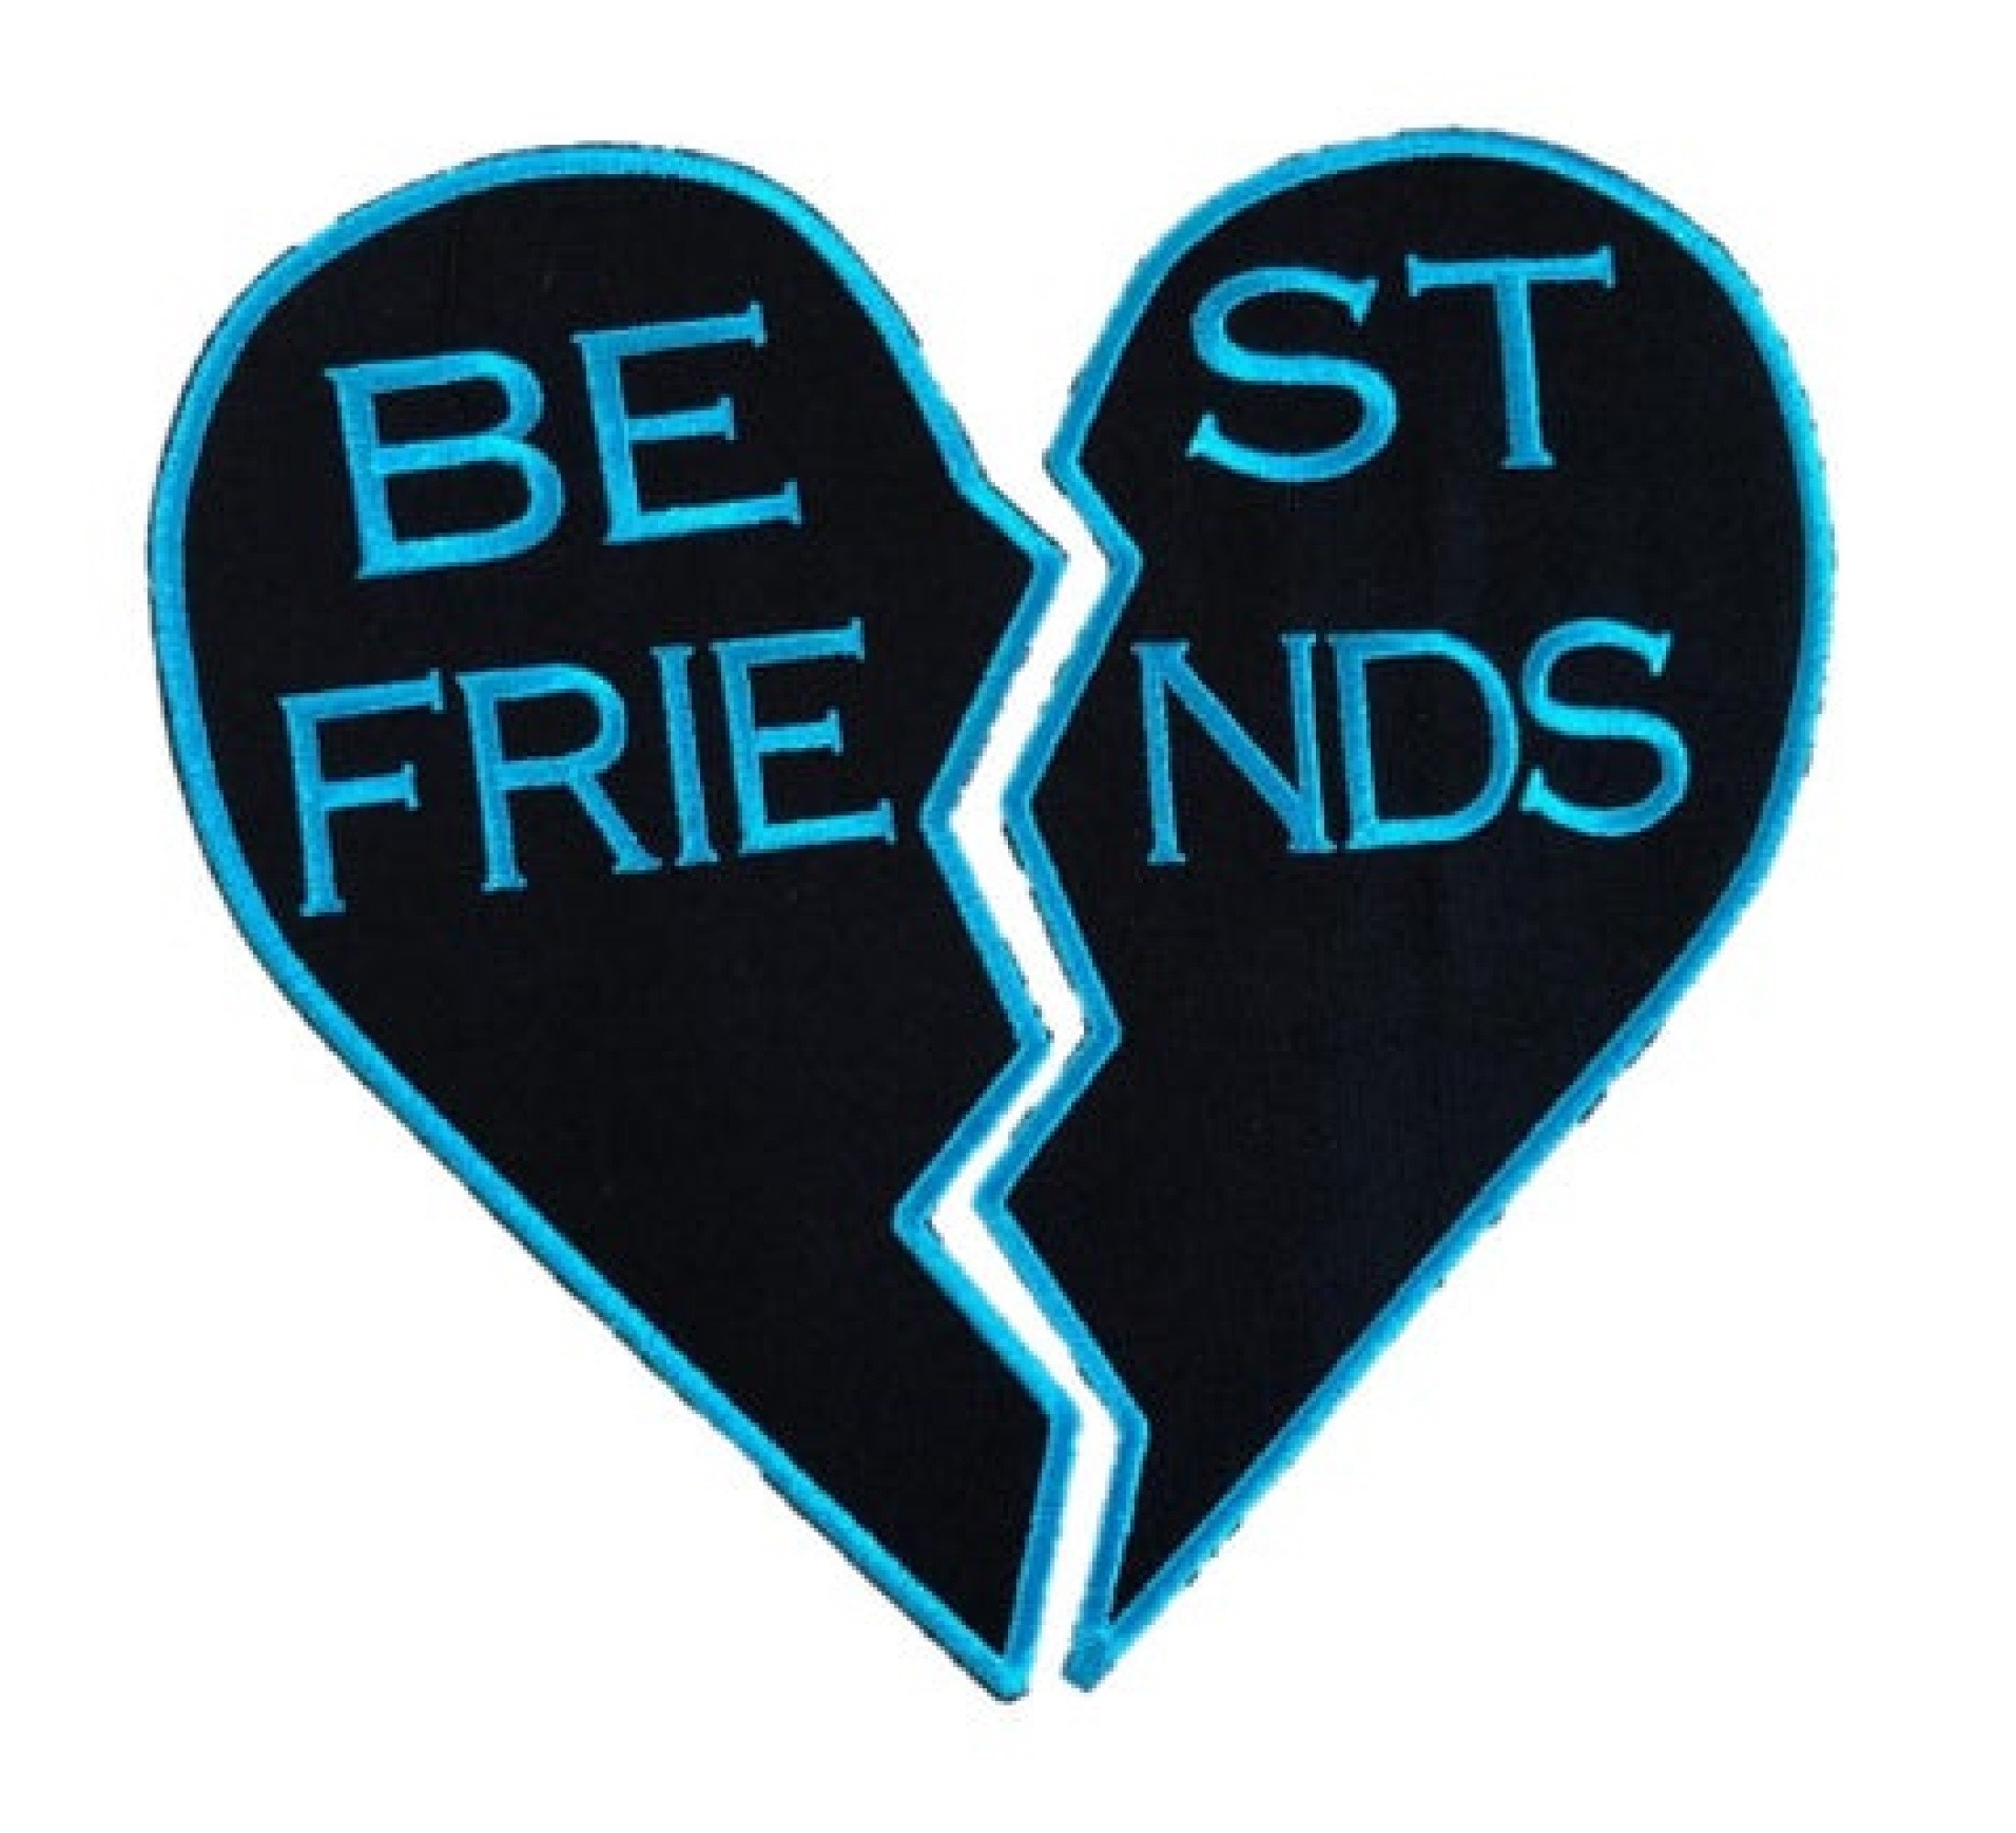 Best Friends Embroidered Back Patches for Jackets, Bestfriends Gift, BFF,  Iron-on Patch 